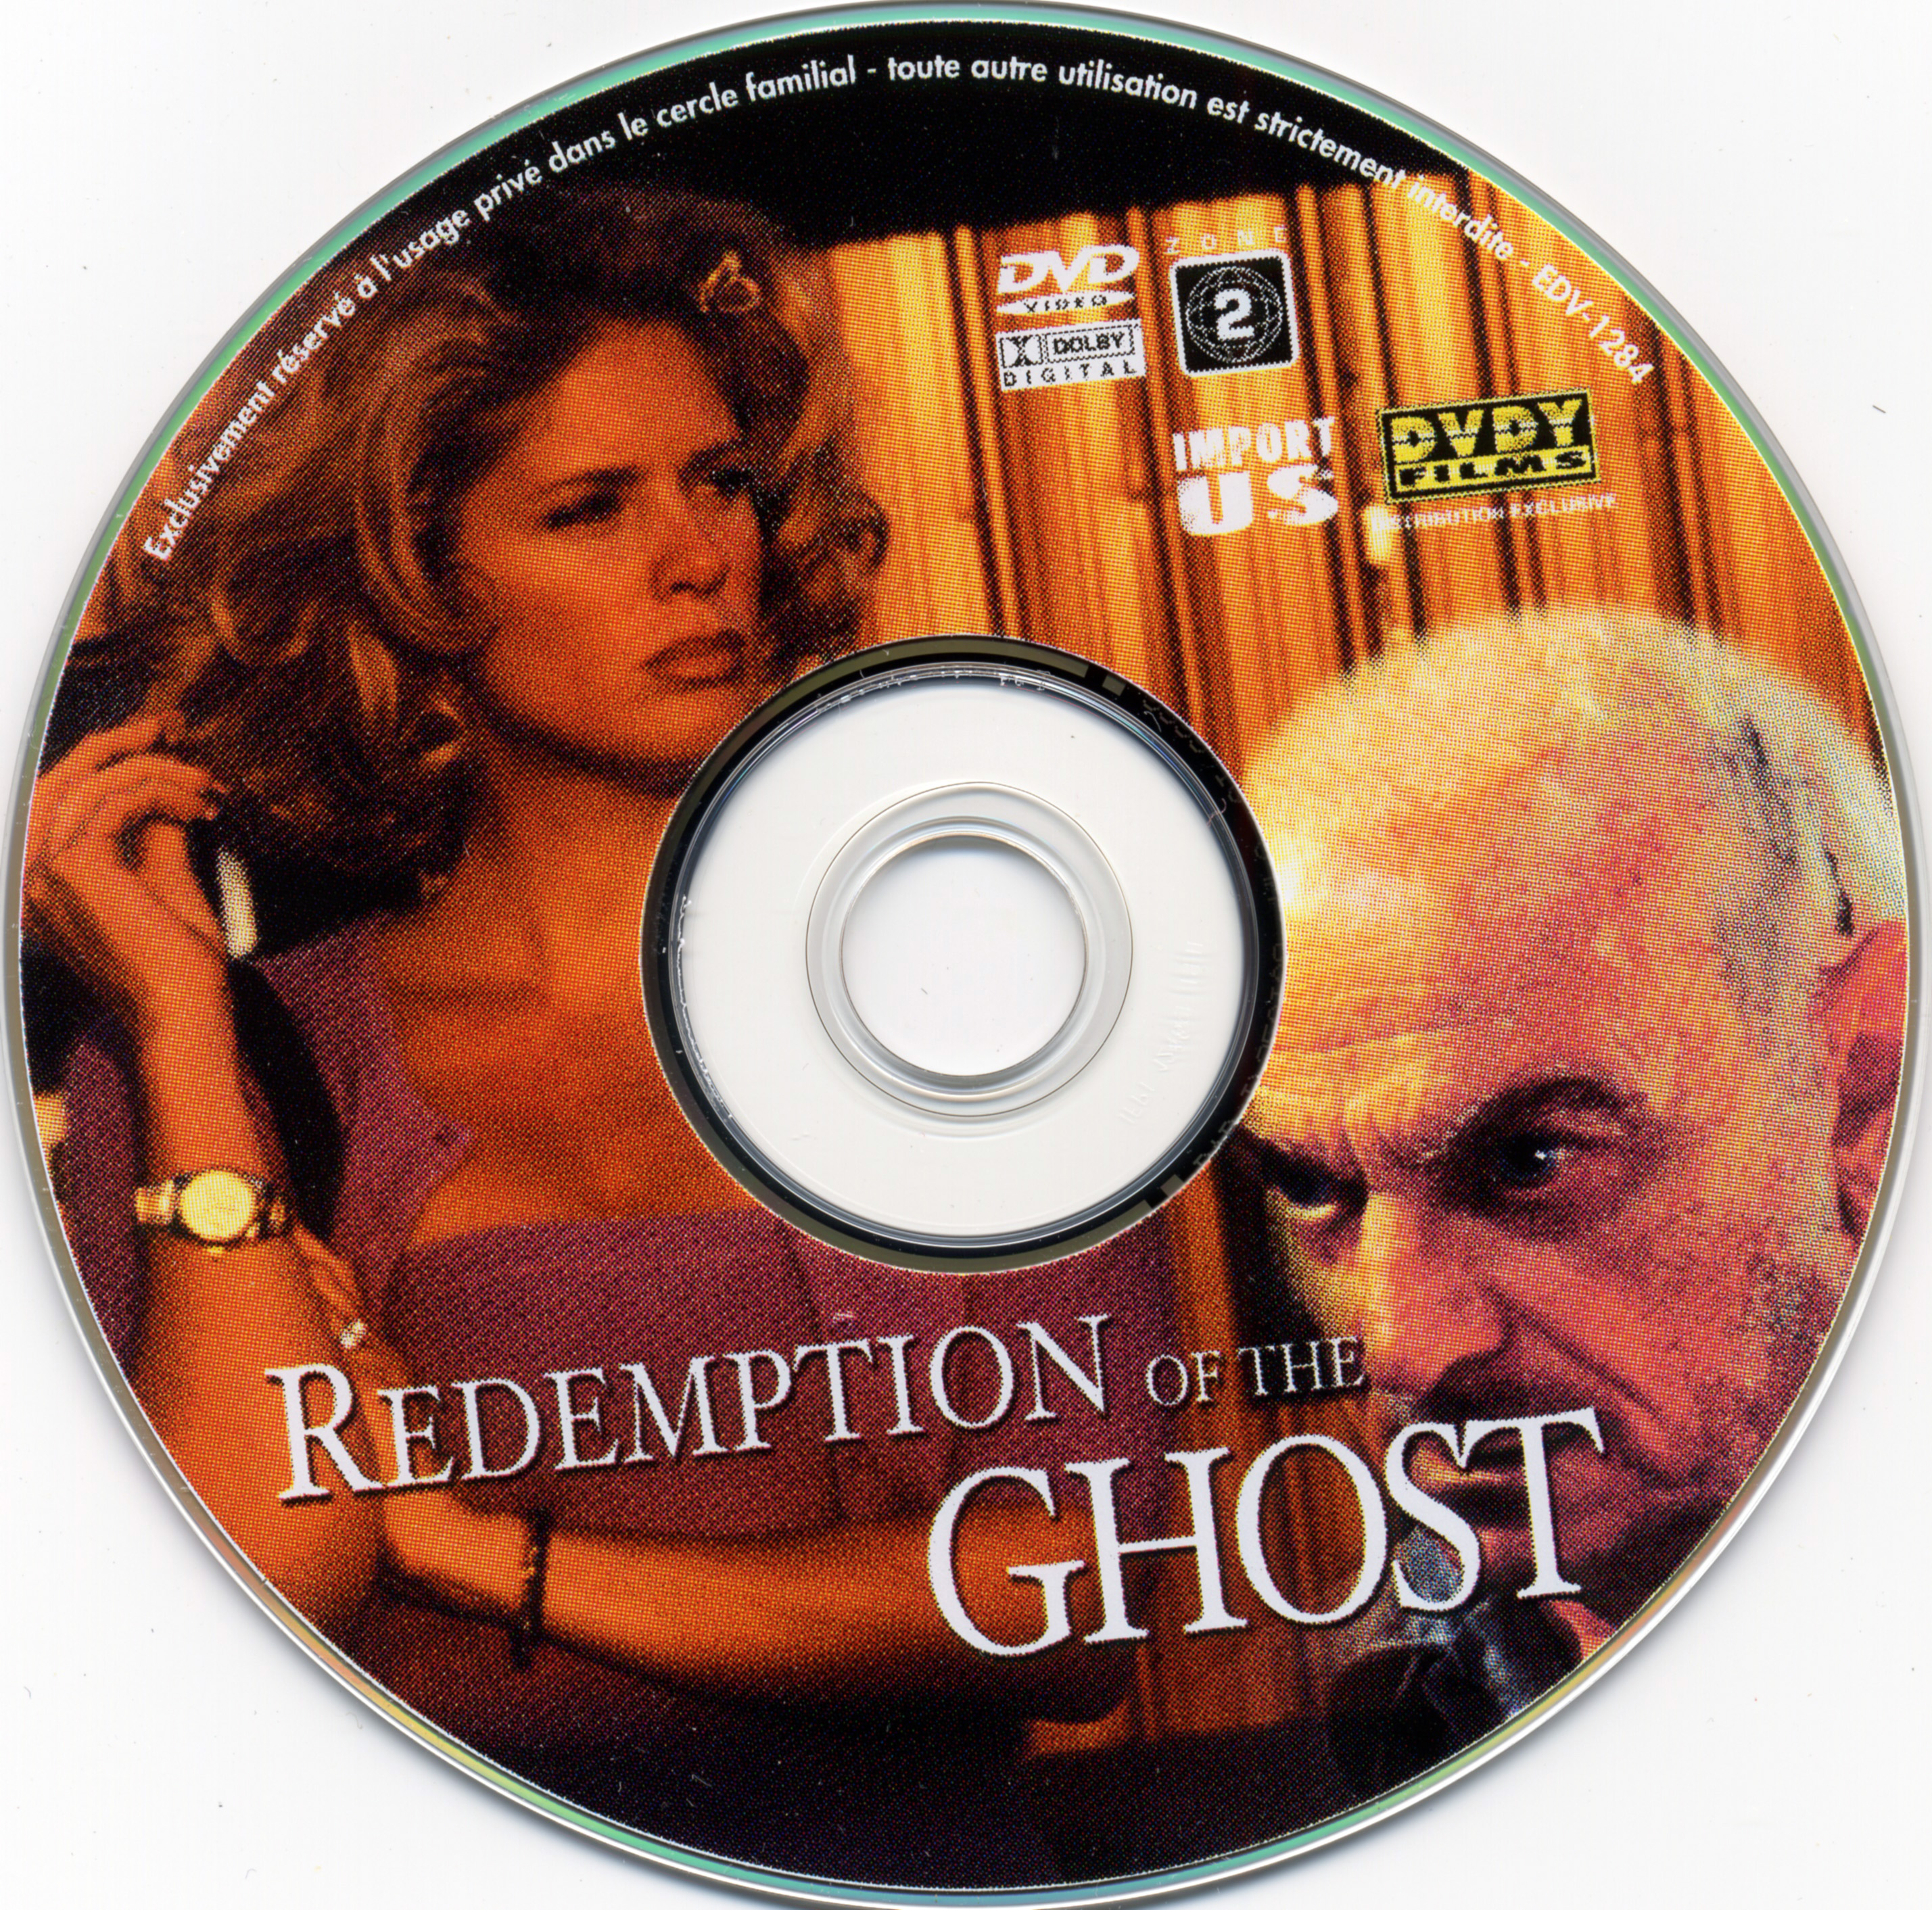 Redemption of the ghost